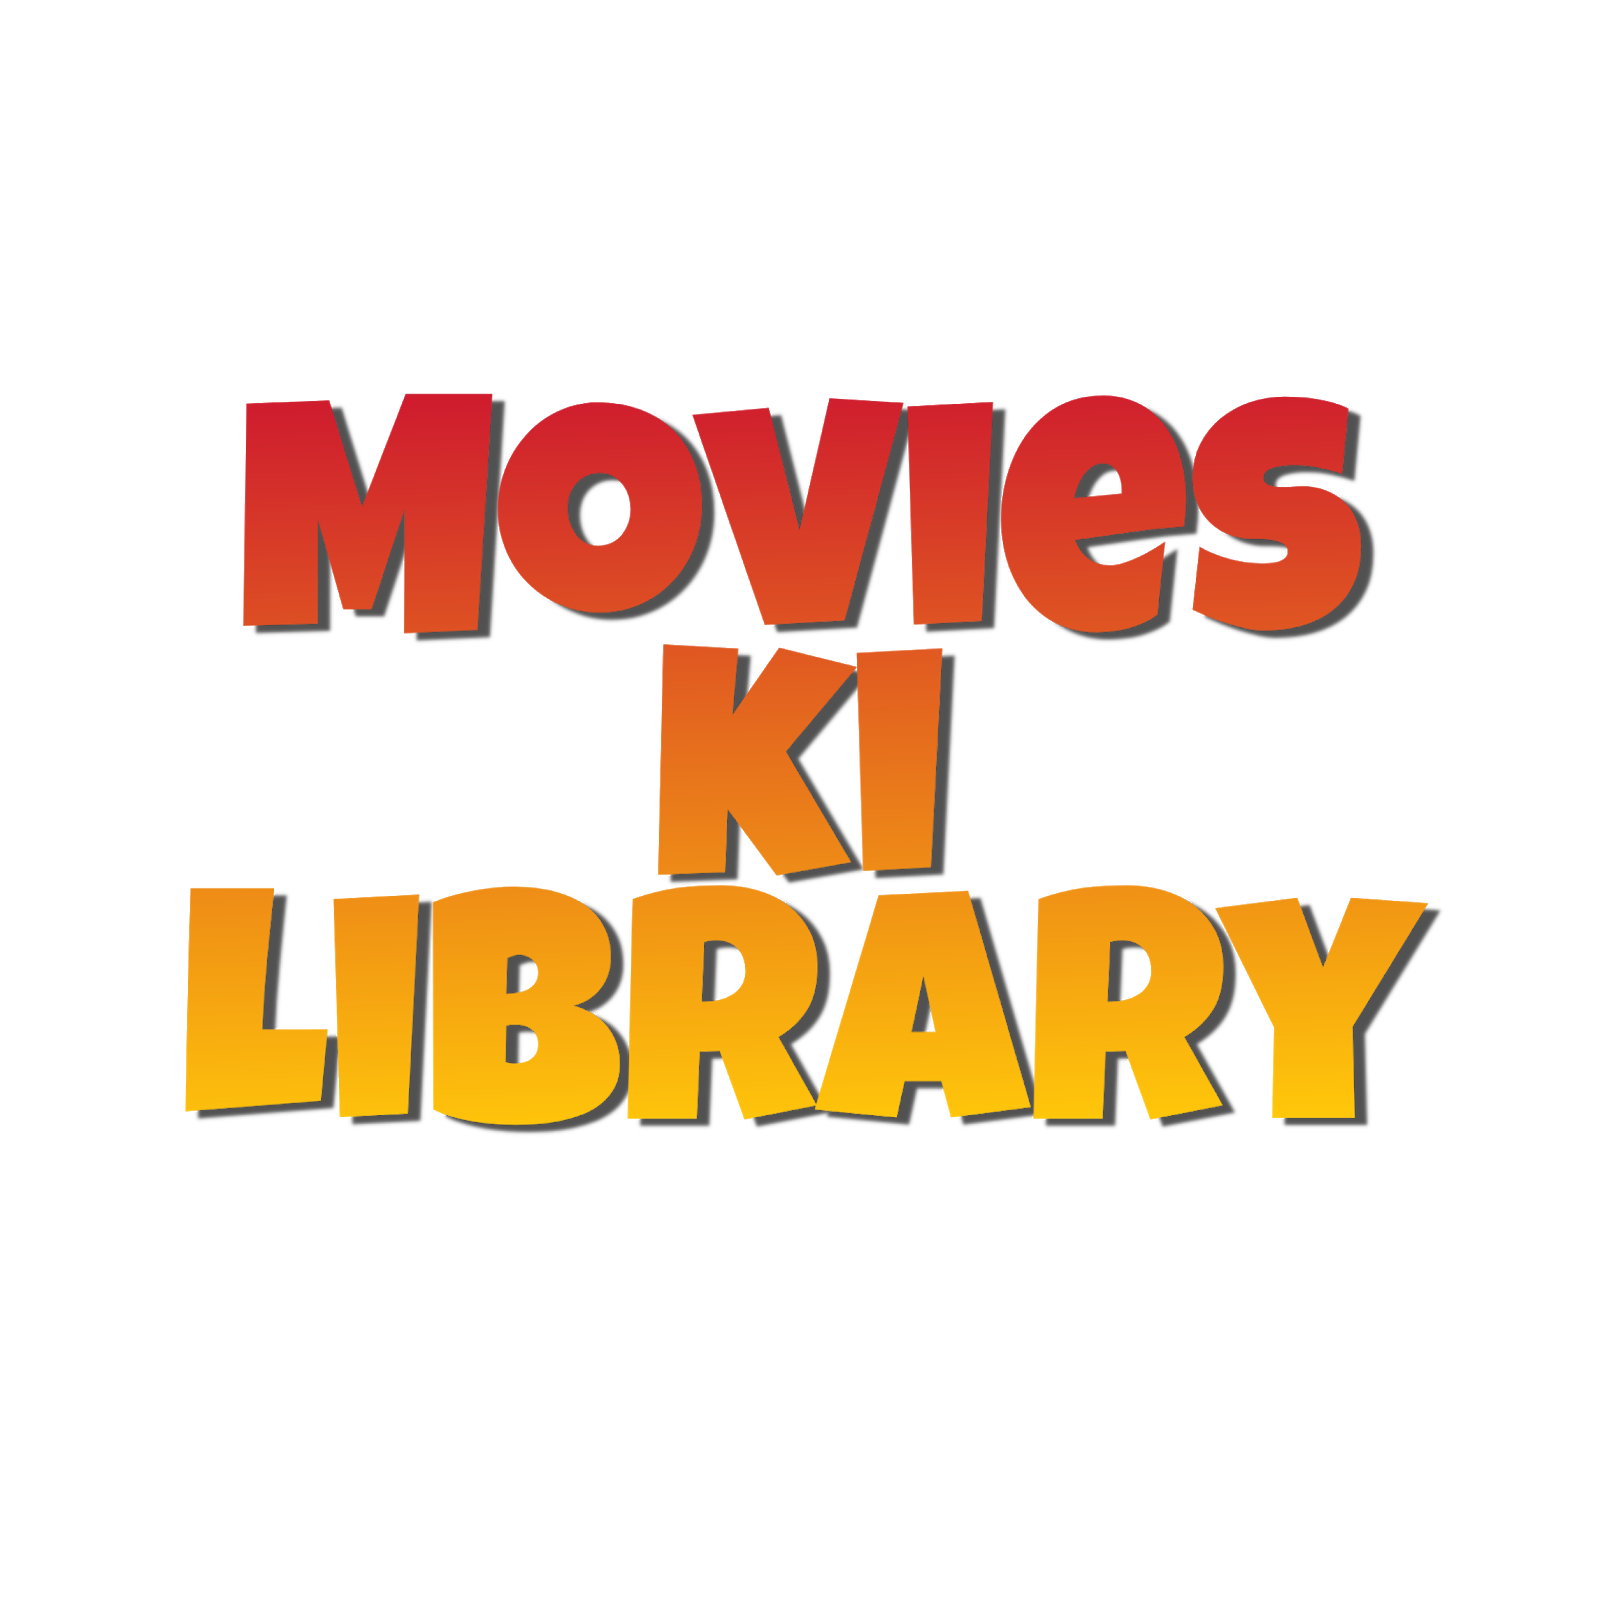 FREE HD MOVIES DOWNLOAD GOOGLE DRIVE LINK